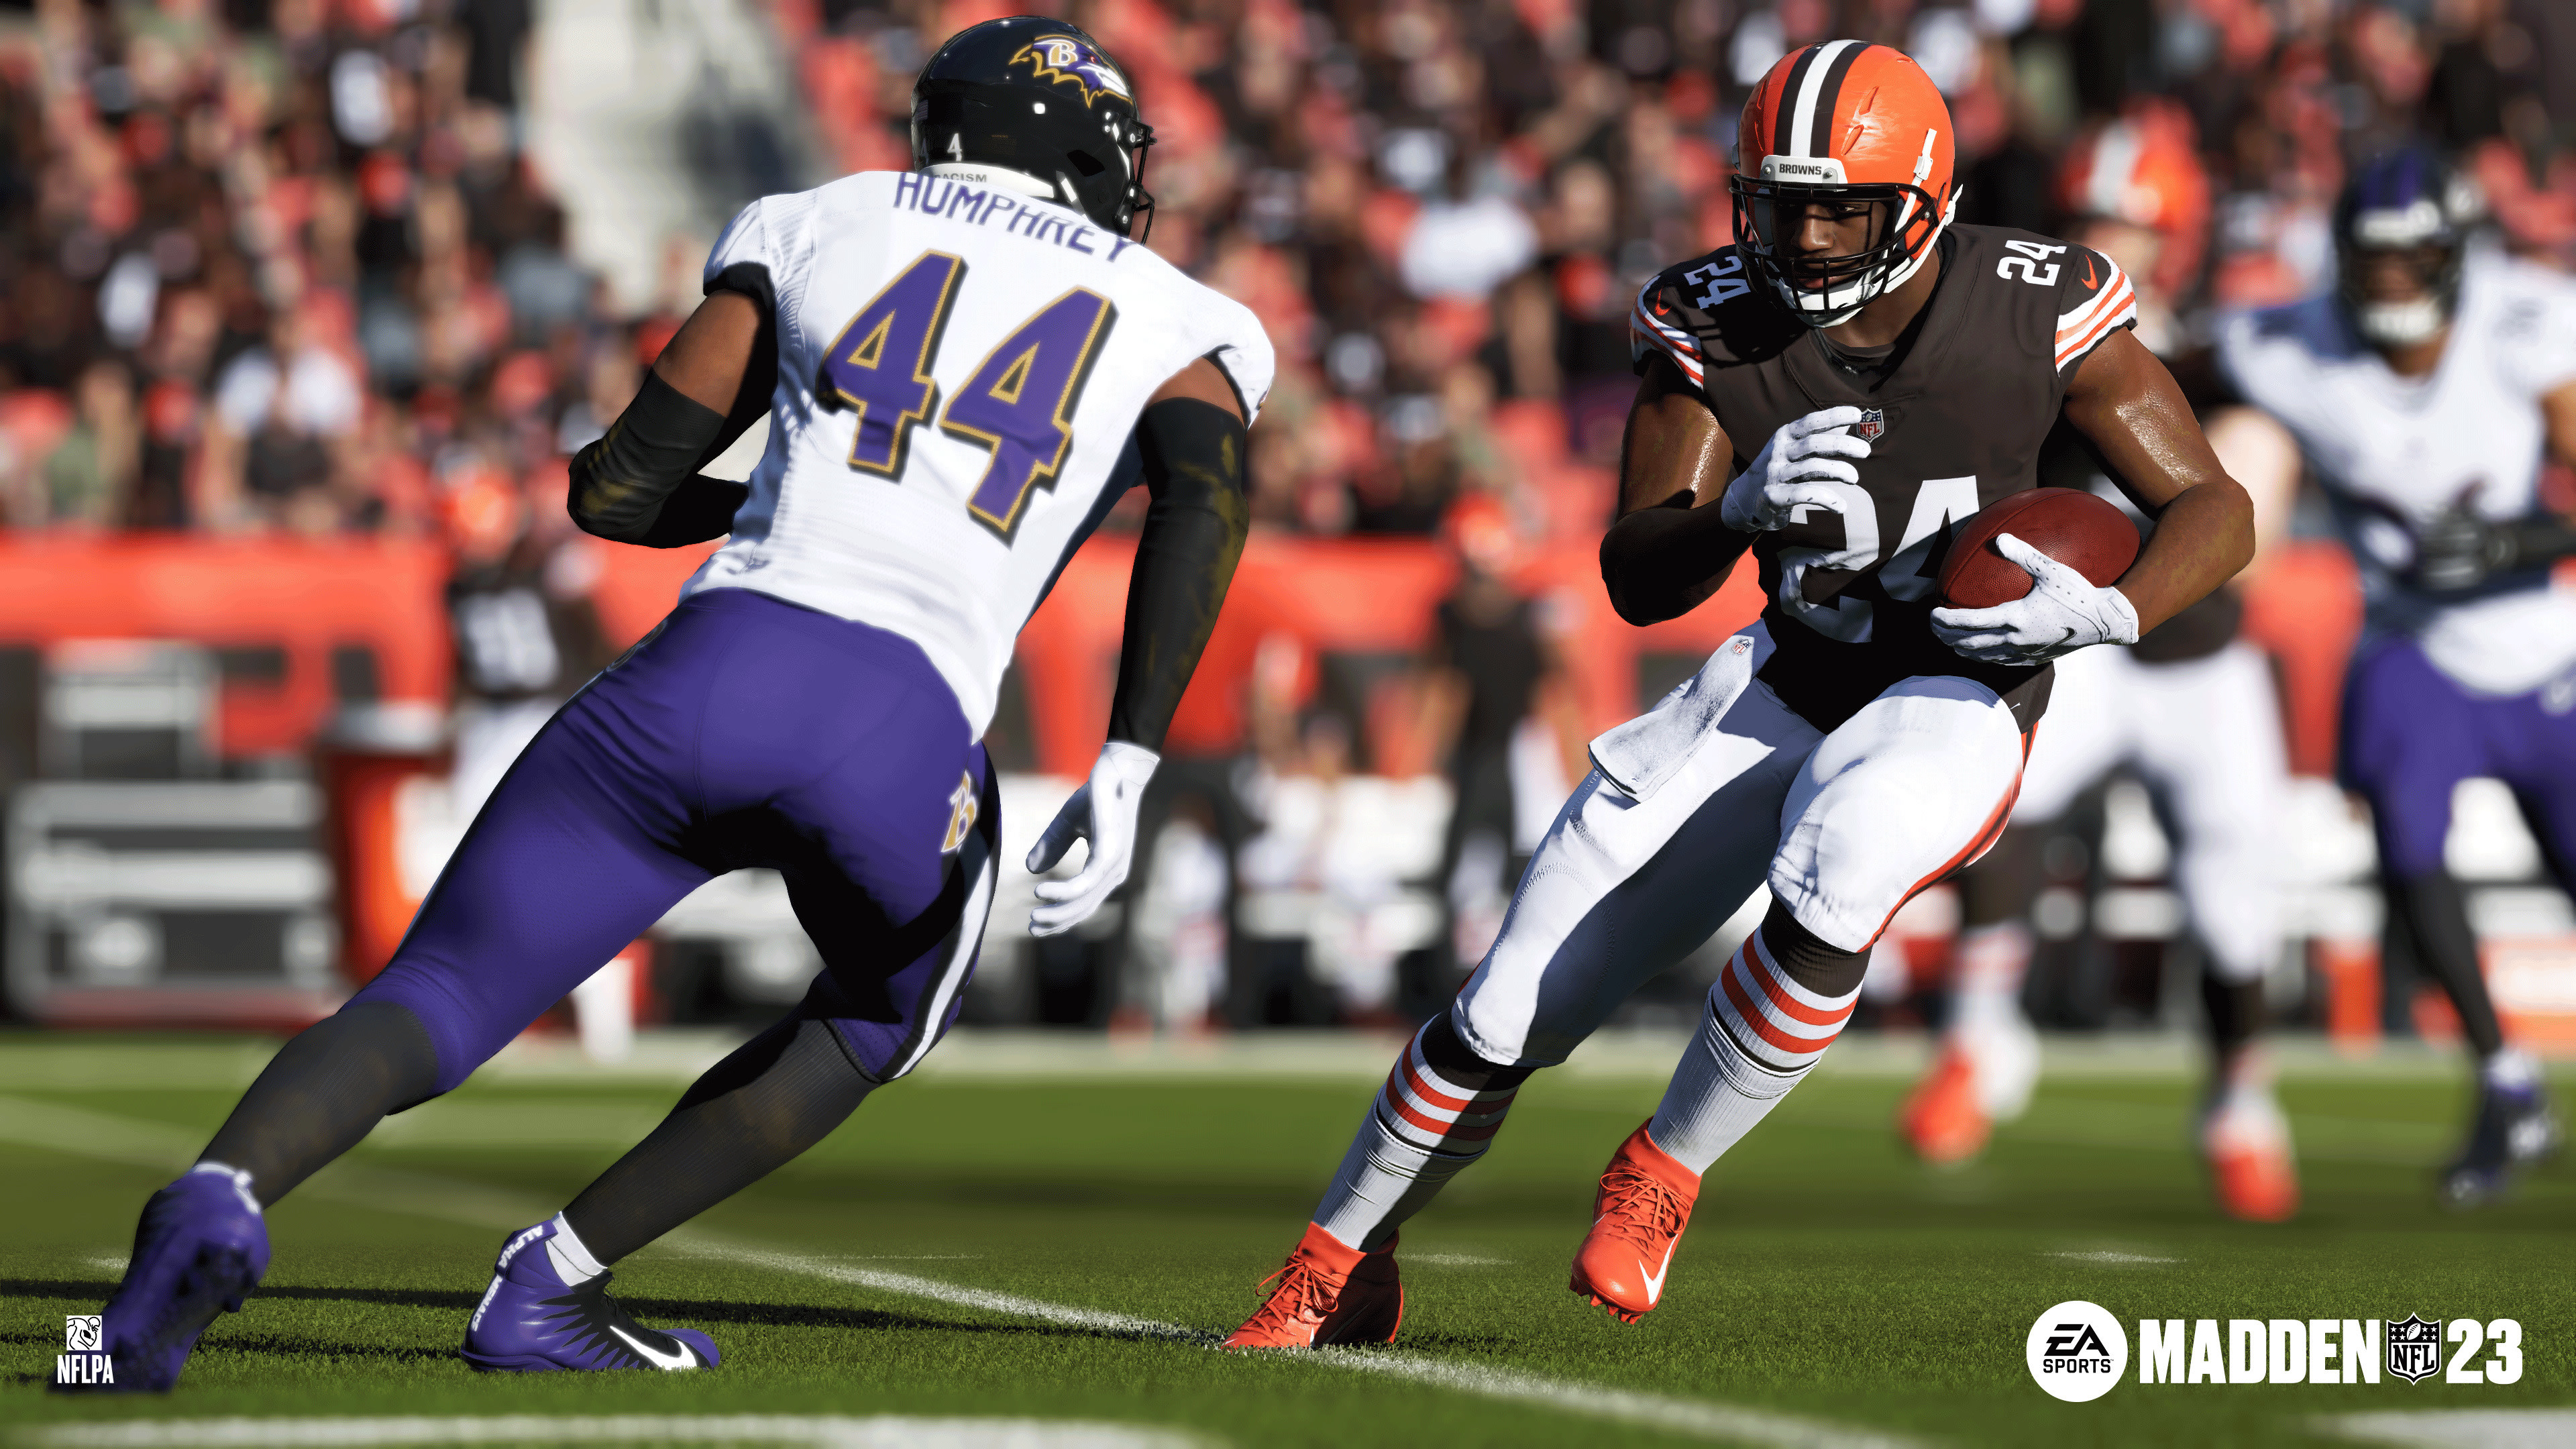 Madden NFL 23 HD Wallpaper and Background